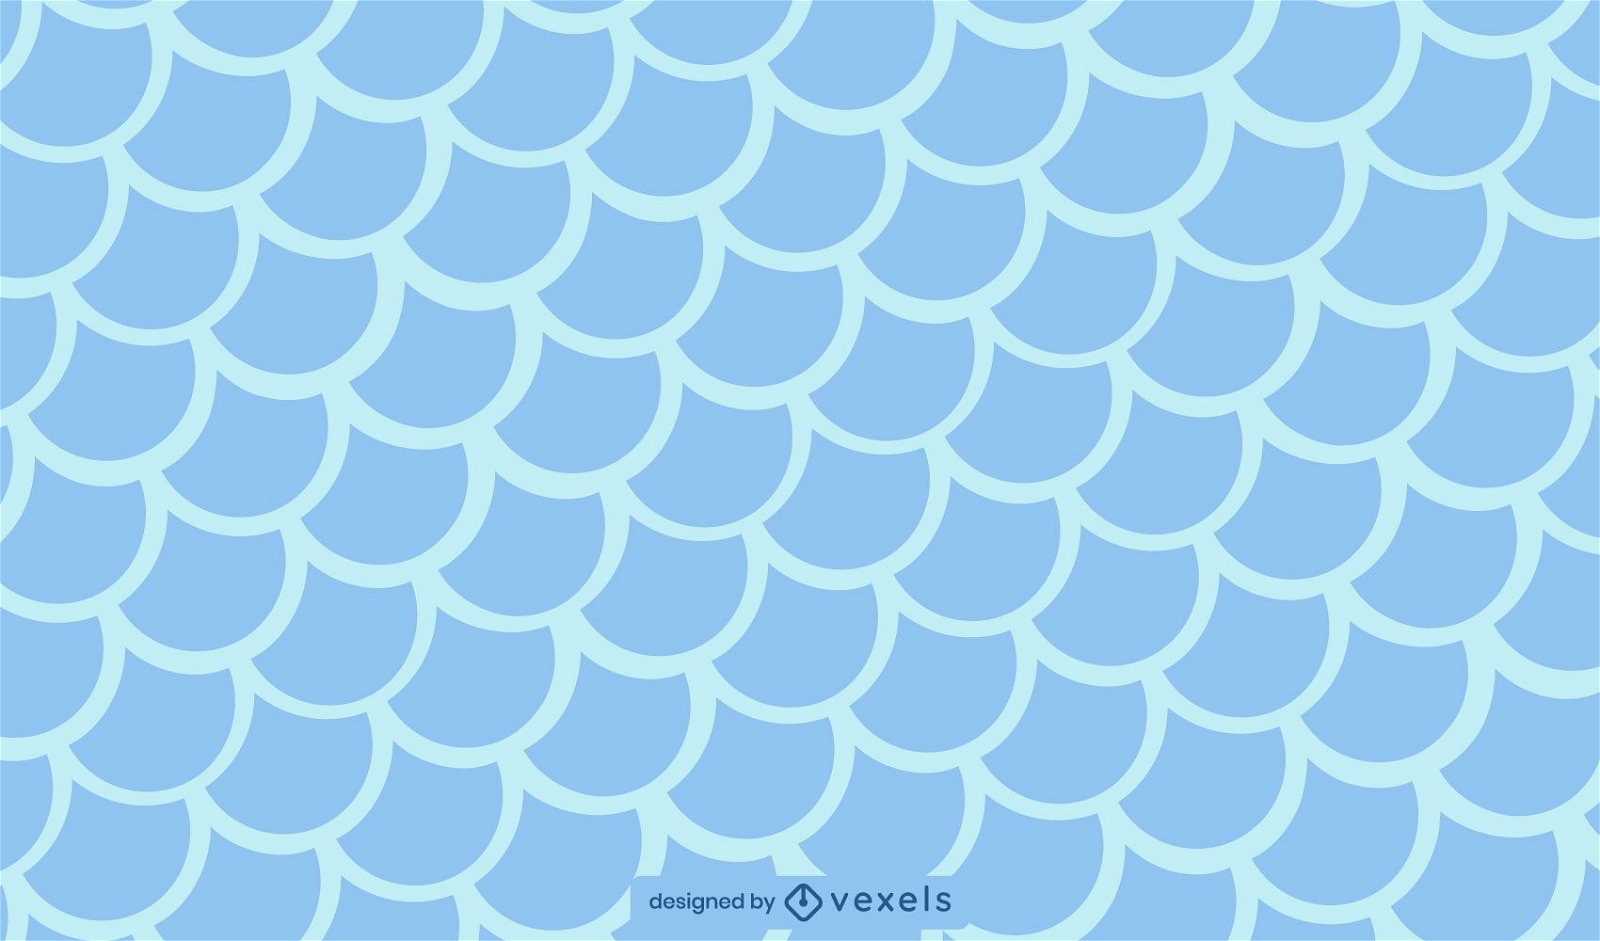 Fish Scales Texture Pattern Vector Download